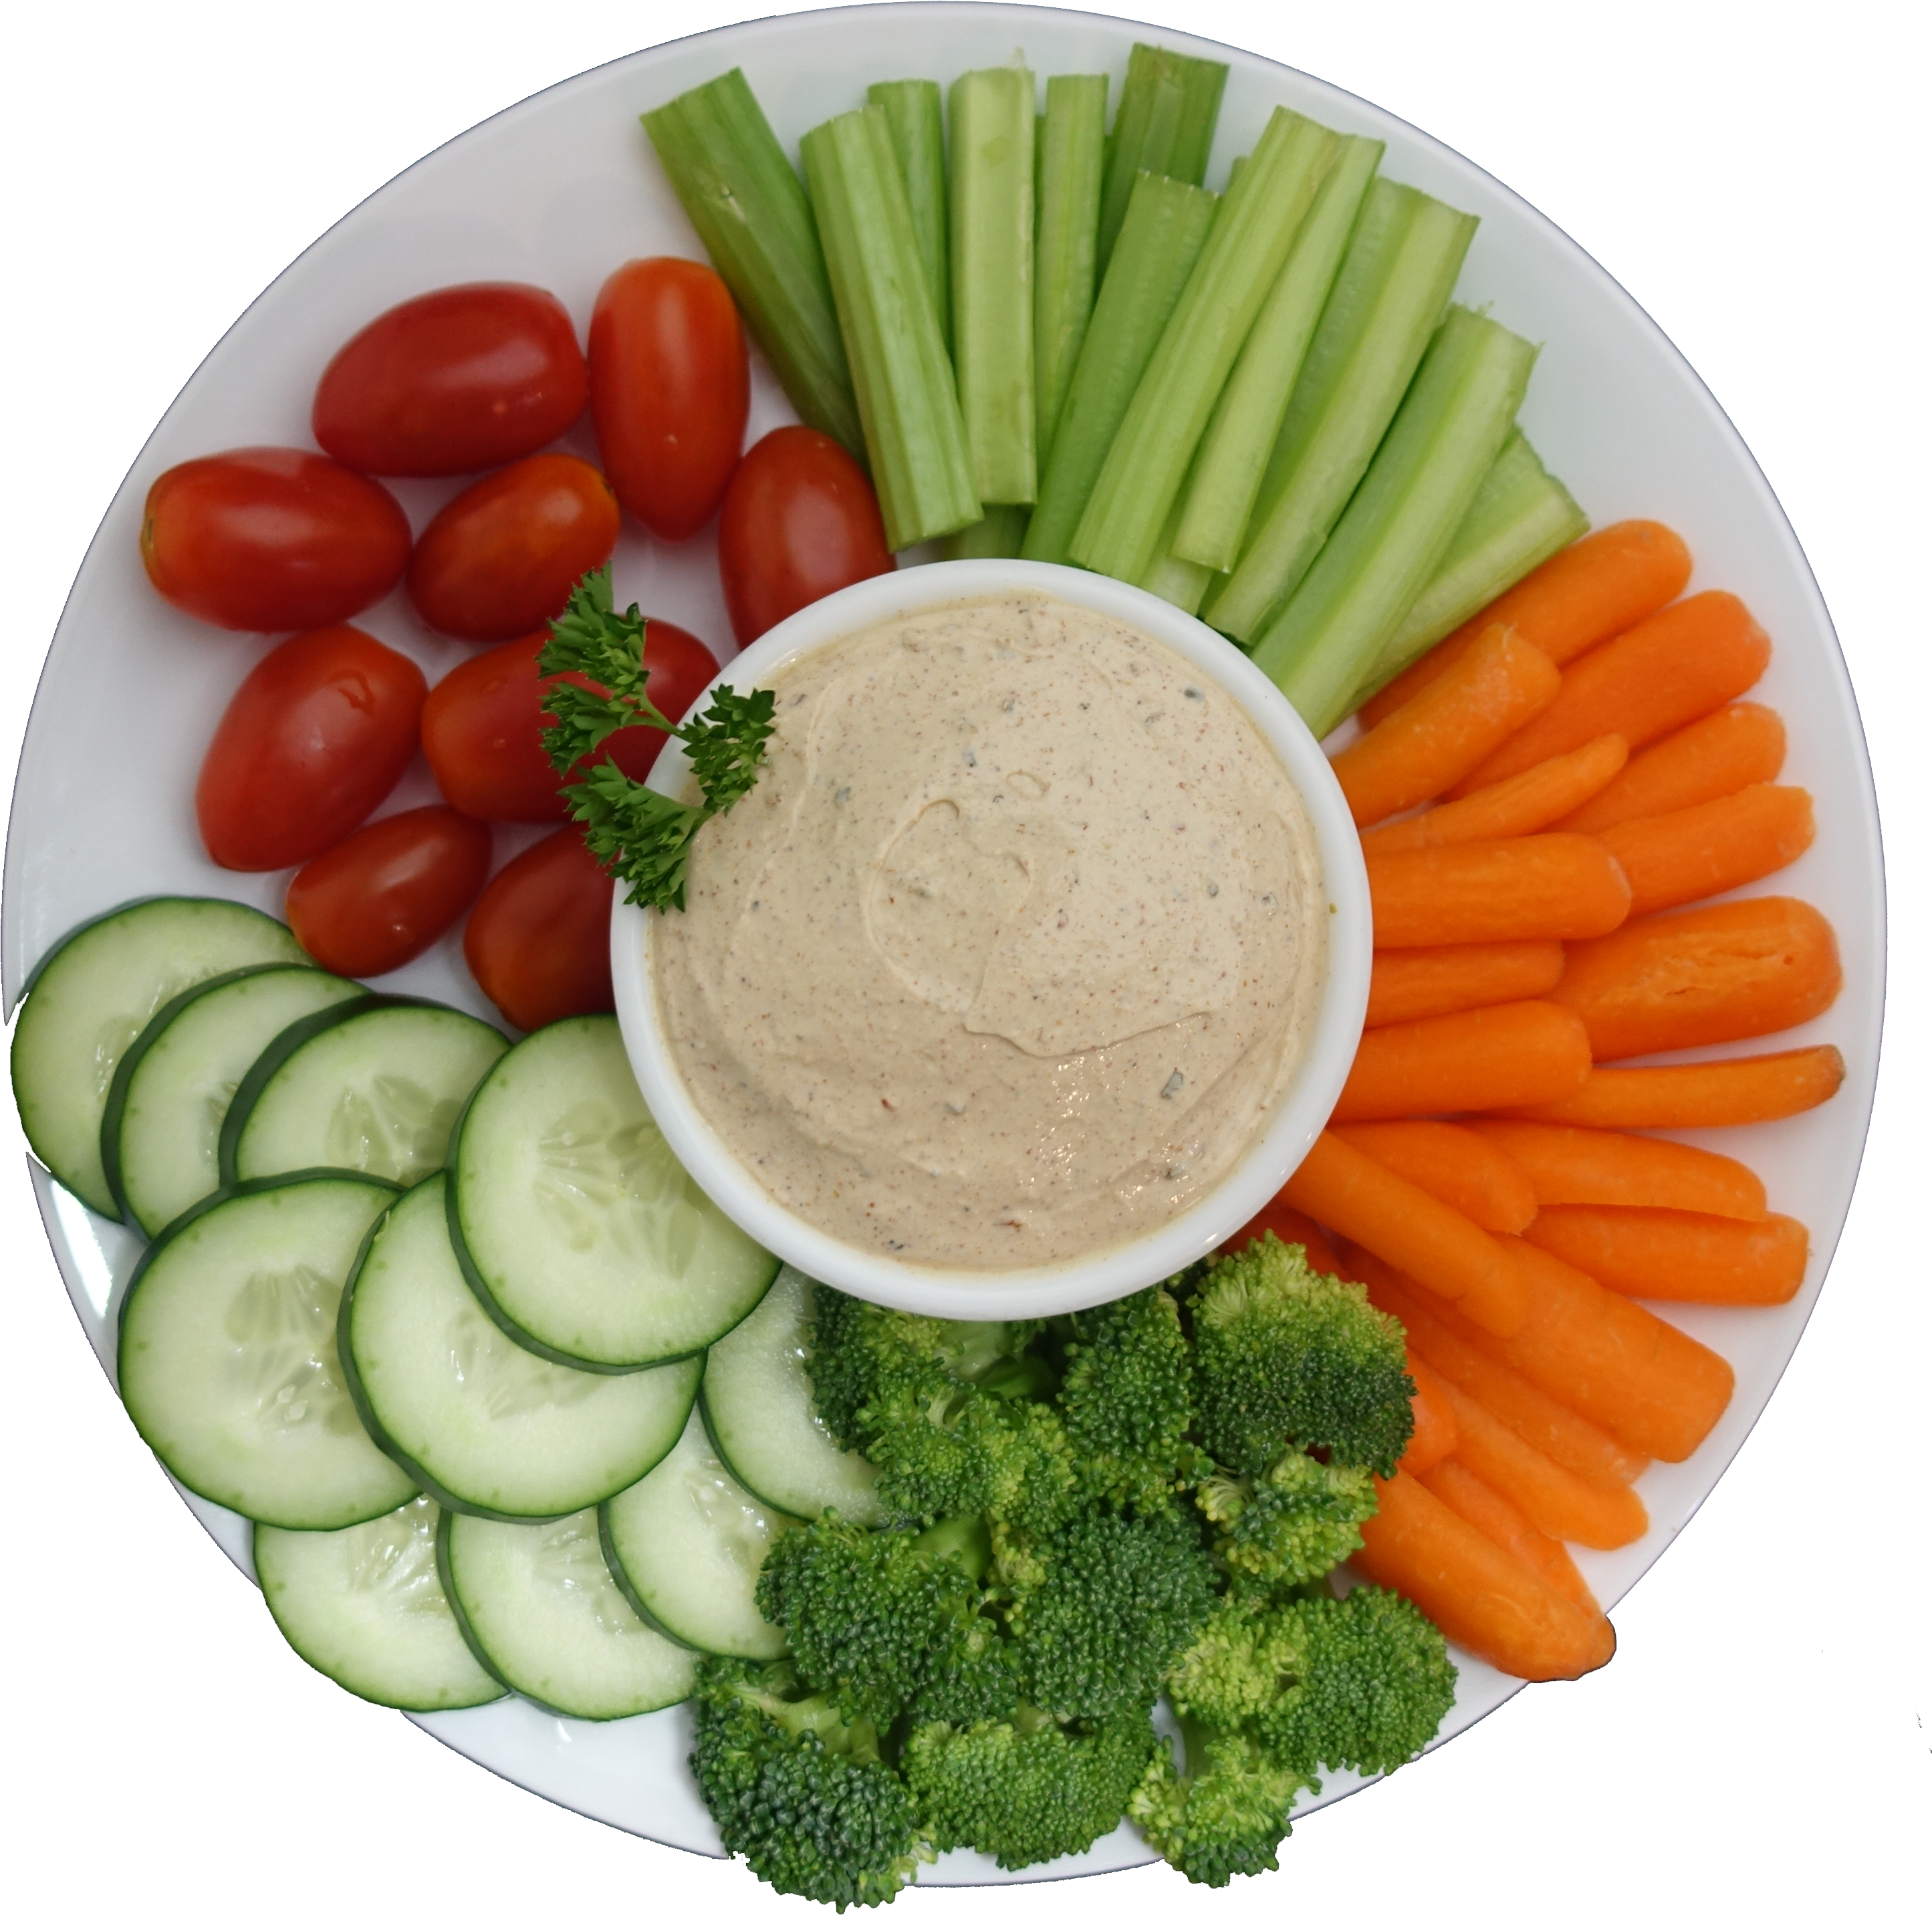 A Plate Of Vegetables And Dip